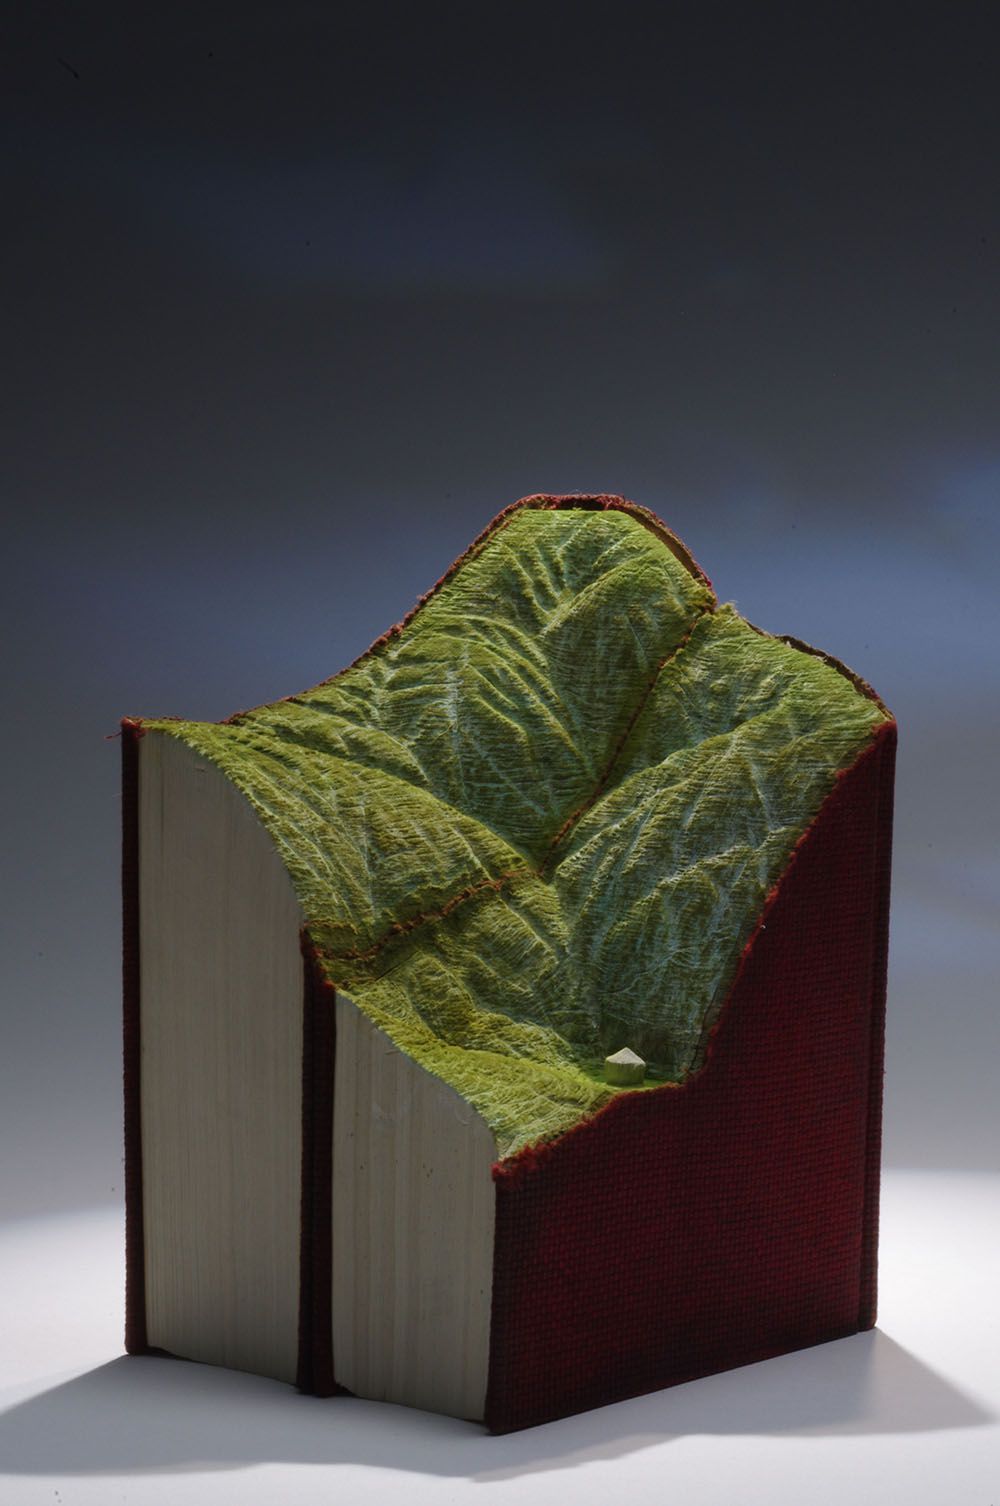 Artist Guy Laramee Turns Old Books Into Stunningly Natural Landscape Sculptures 24